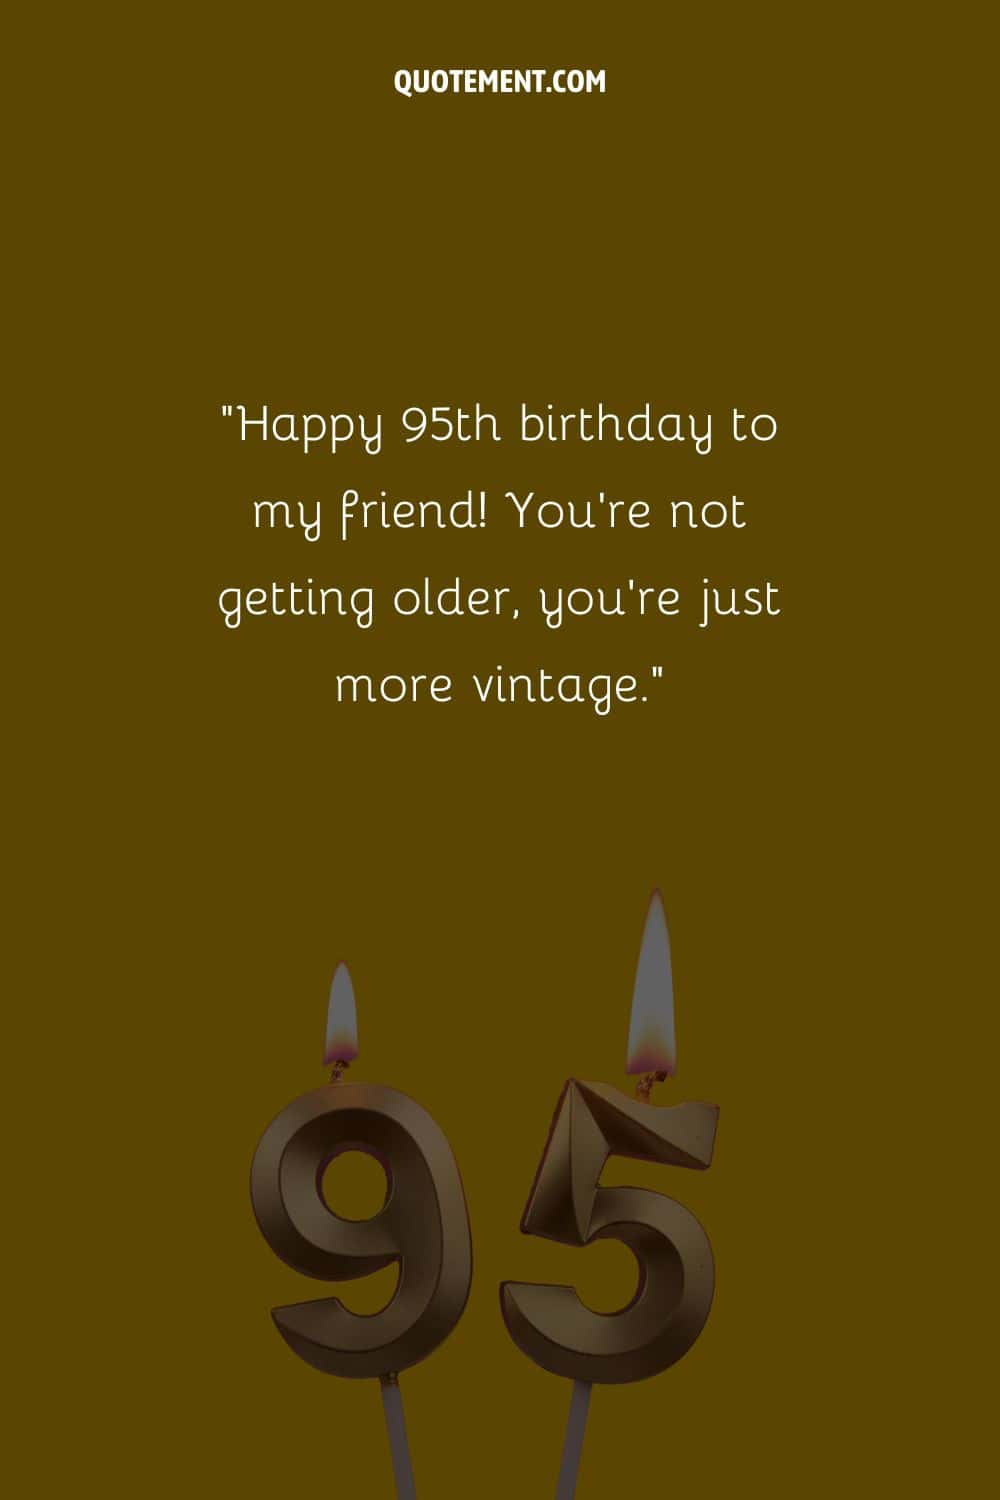 “Happy 95th birthday to my friend! You're not getting older, you're just more vintage.”